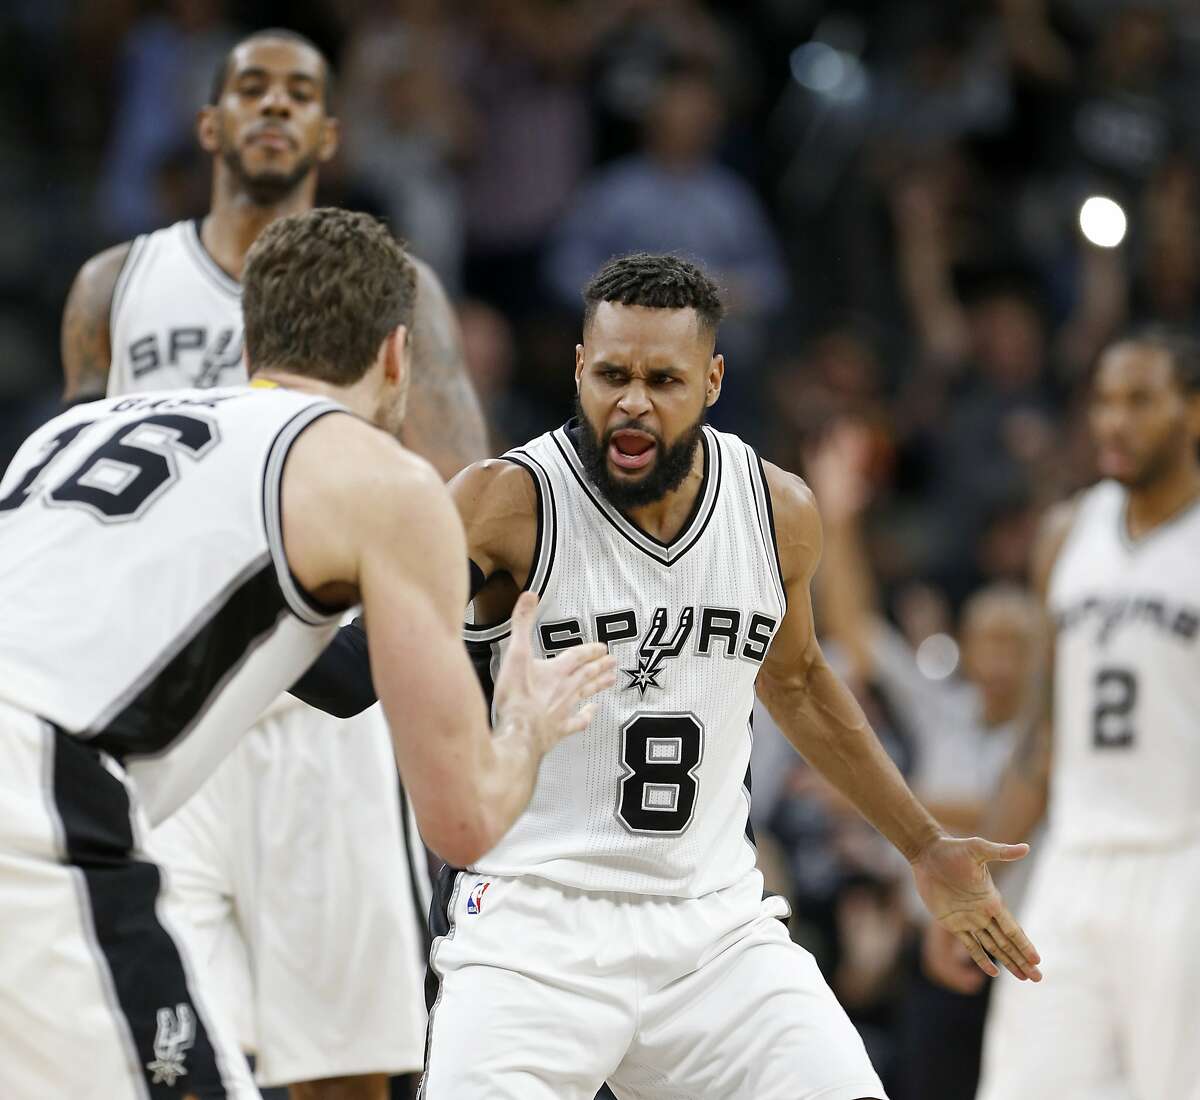 San Antonio Spurs' Patty Mills celebrates with Pau Gasol after Gasol made a 3-pointer during second half action of Game 2 in the first round of the Western Conference playoffs against the Memphis Grizzlies held Monday April 17, 2017 at the AT&T Center.